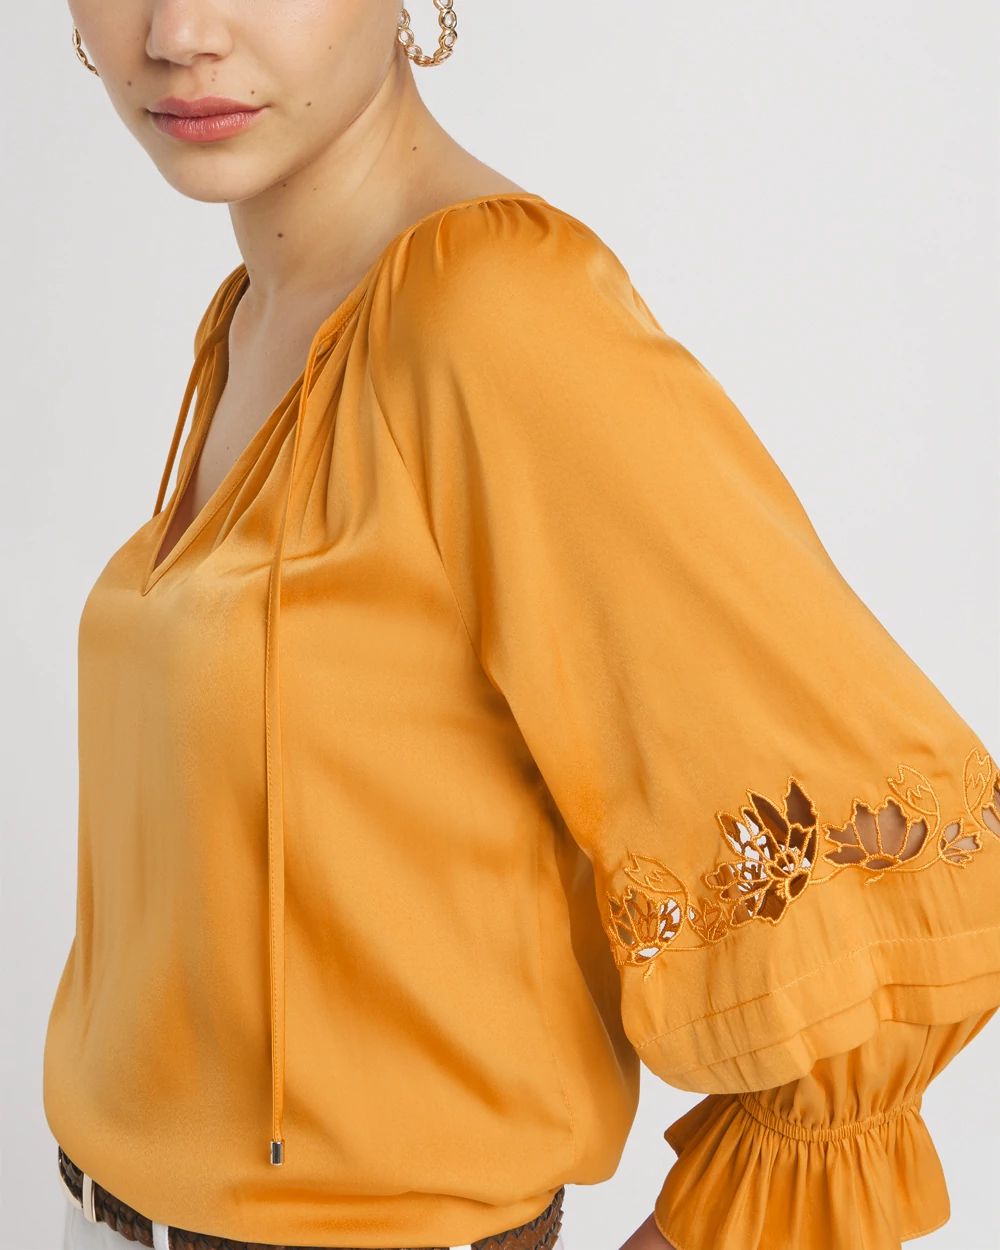 Elbow-Sleeve Embroidered Detail Blouse click to view larger image.